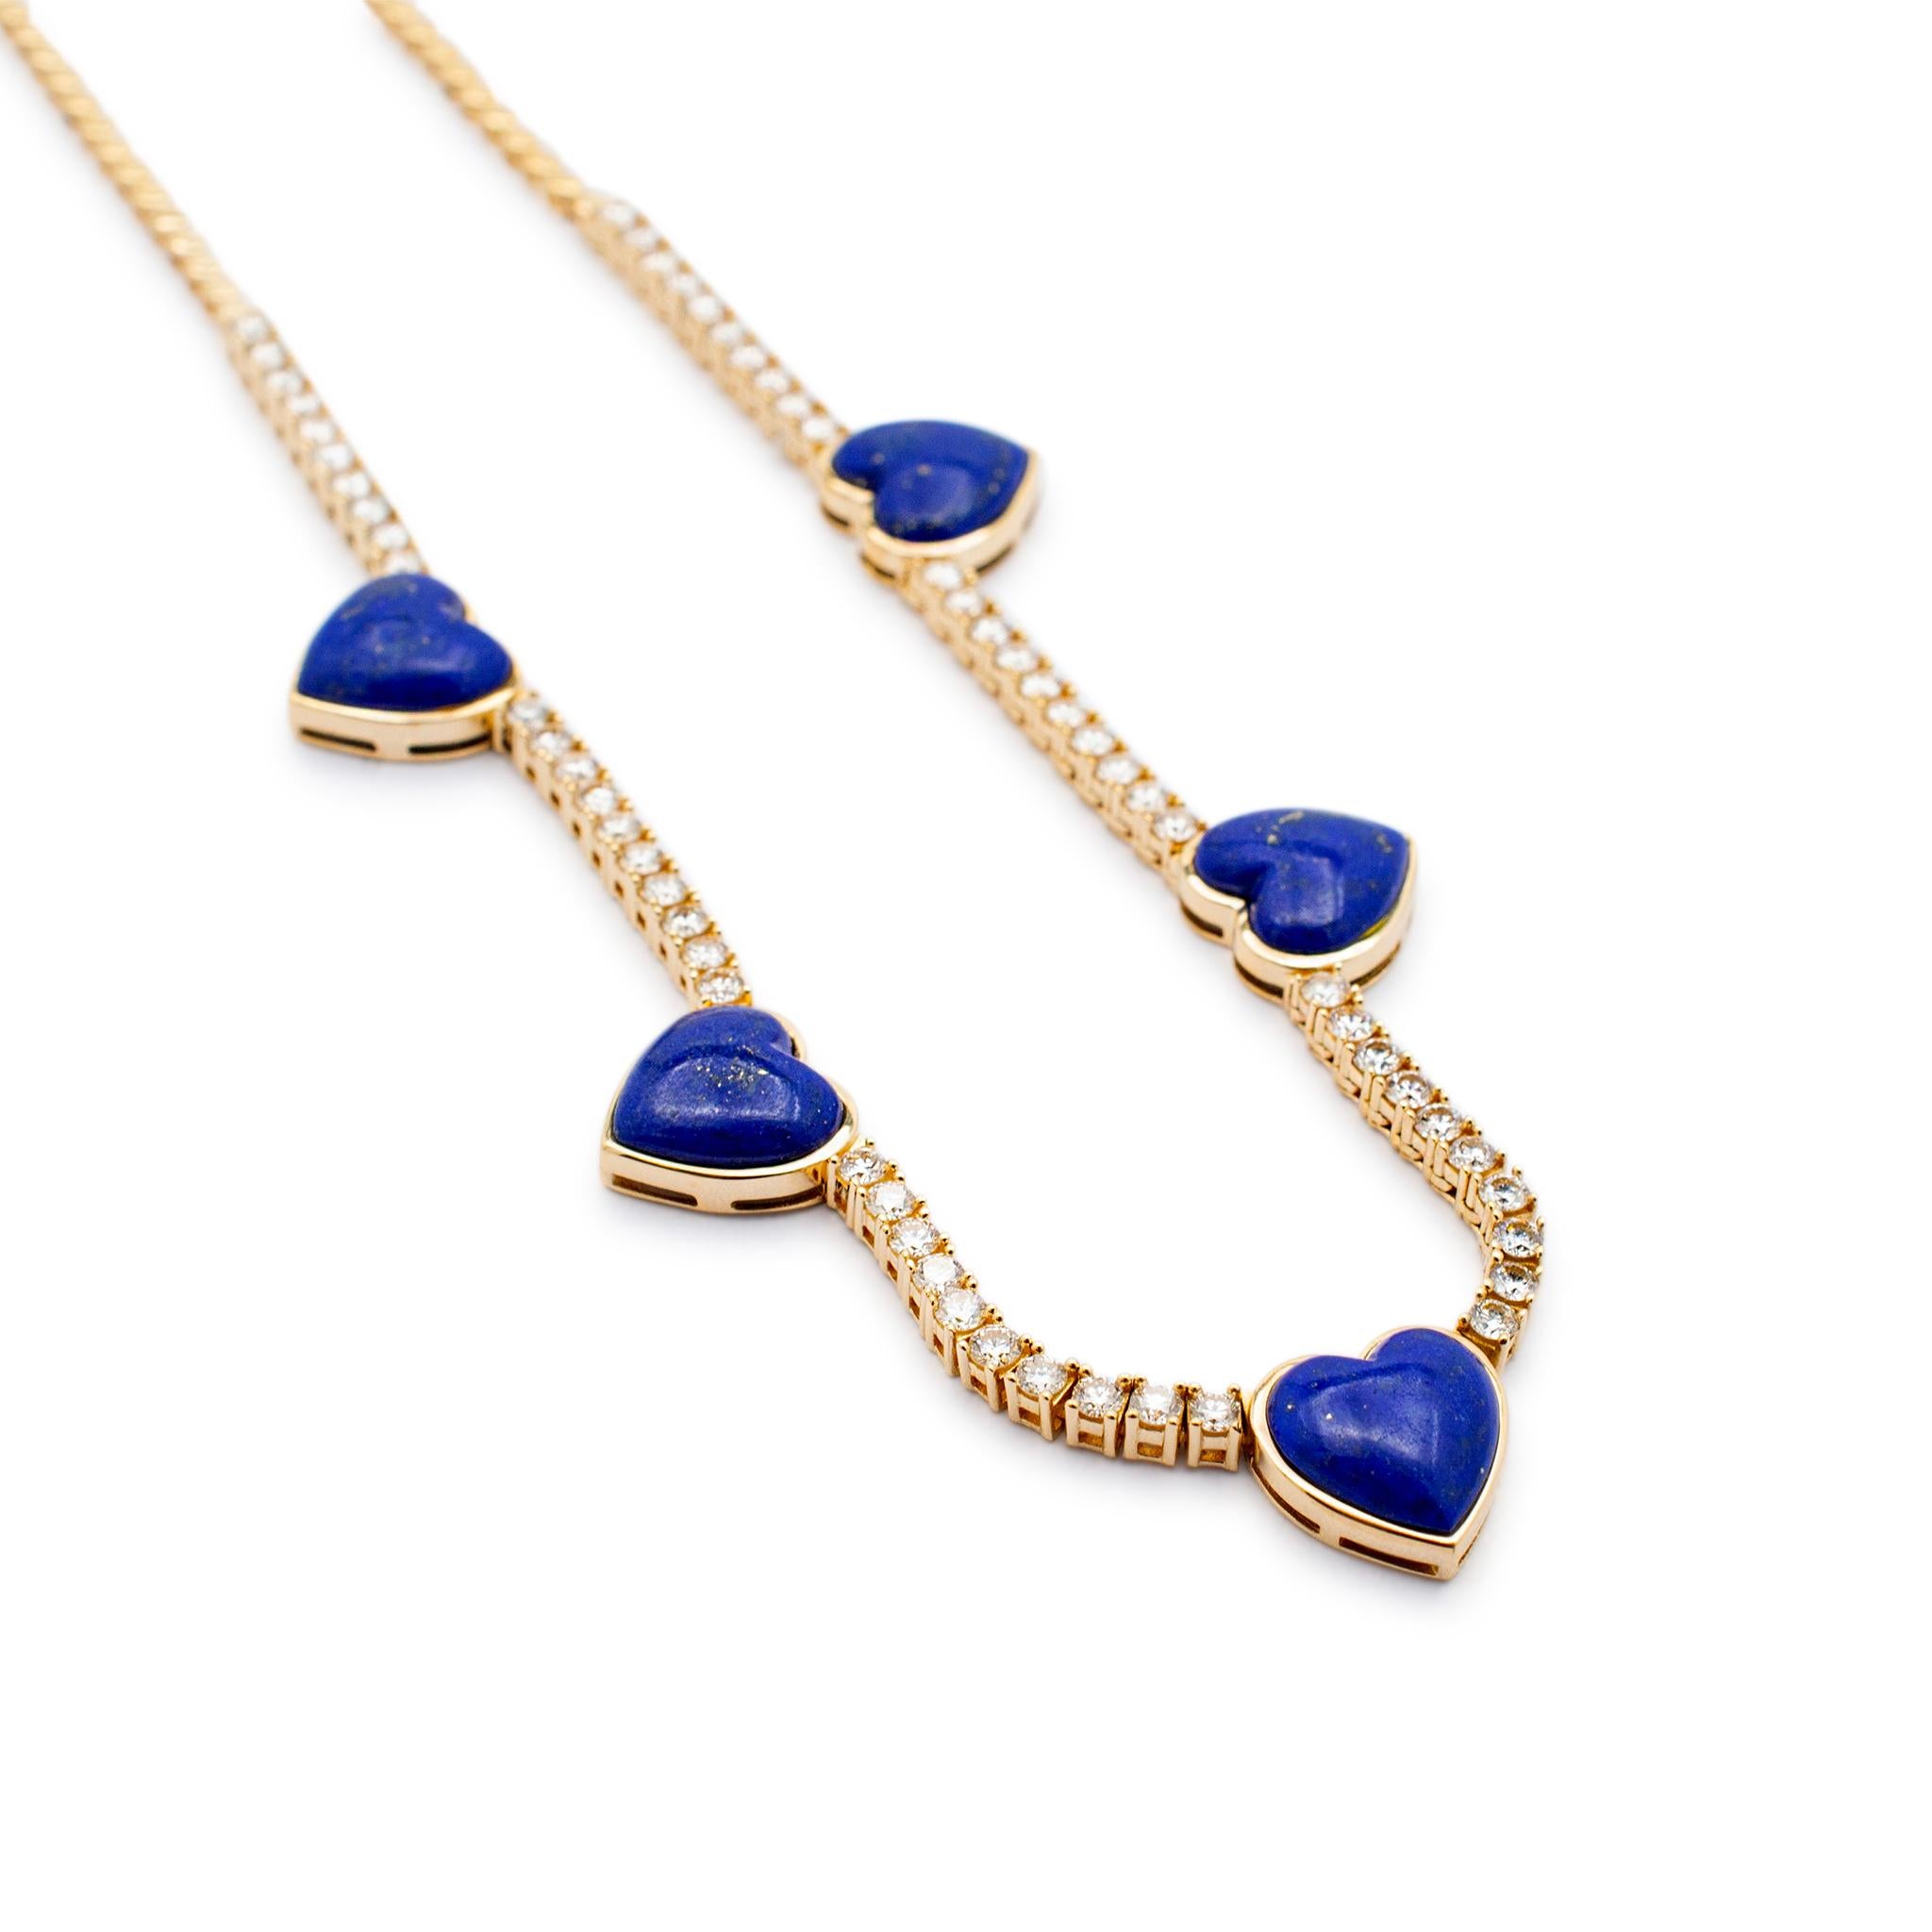 Gender: Ladies

Metal type: 14K Yellow Gold

Length: 17.50 inches

Weight: 19.92 grams

Ladies 14K yellow gold single strand, diamond and lapis lazuli contemporary-style station necklace. Engraved with 